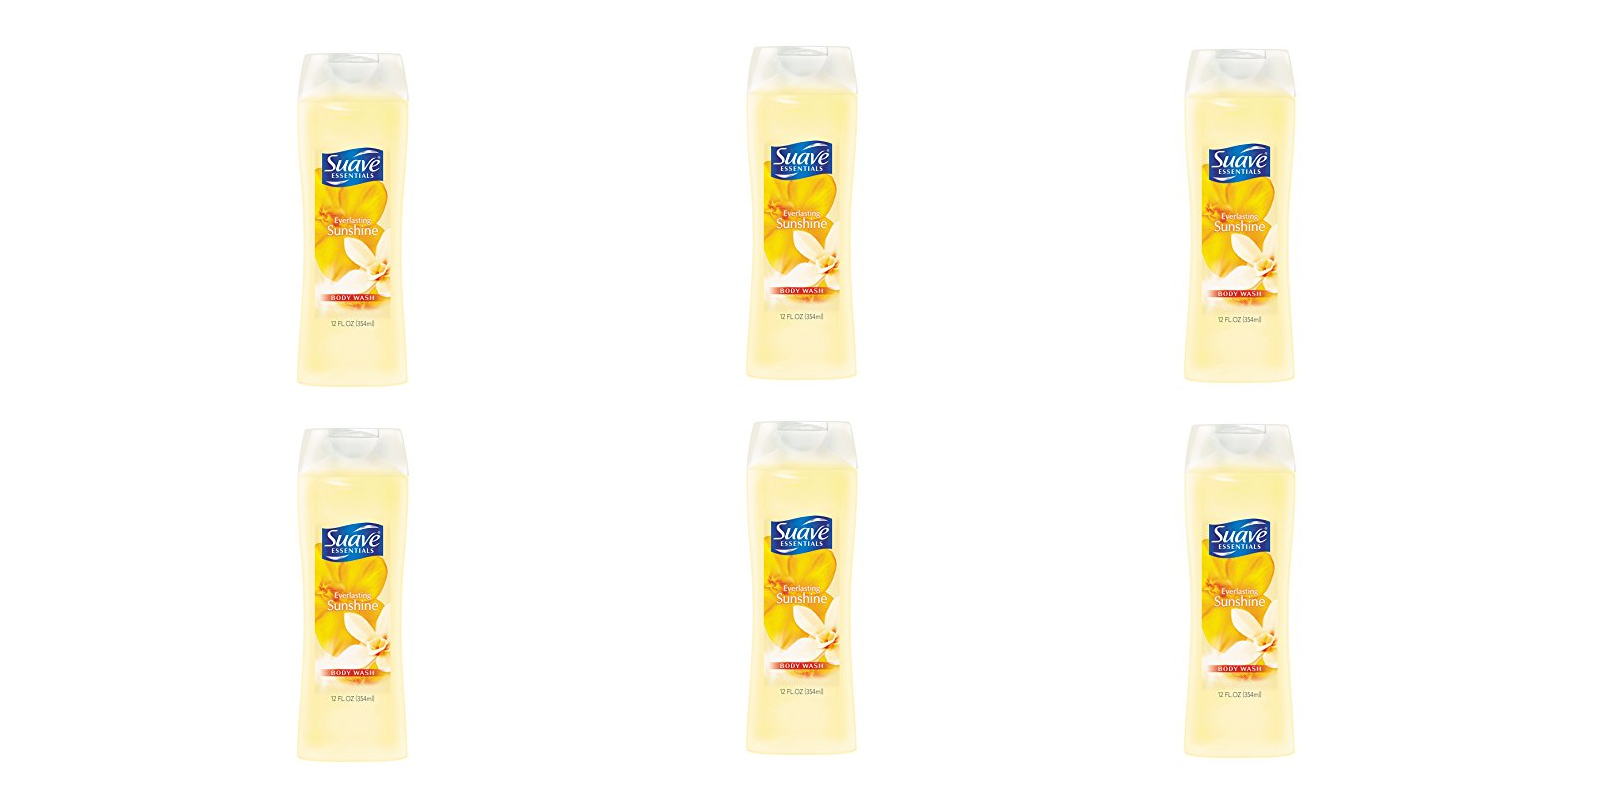 *SIX* Bottles of Suave Everlasting Sunshine Body Wash ONLY $9.50!! Just $1.58 Each SHIPPED!